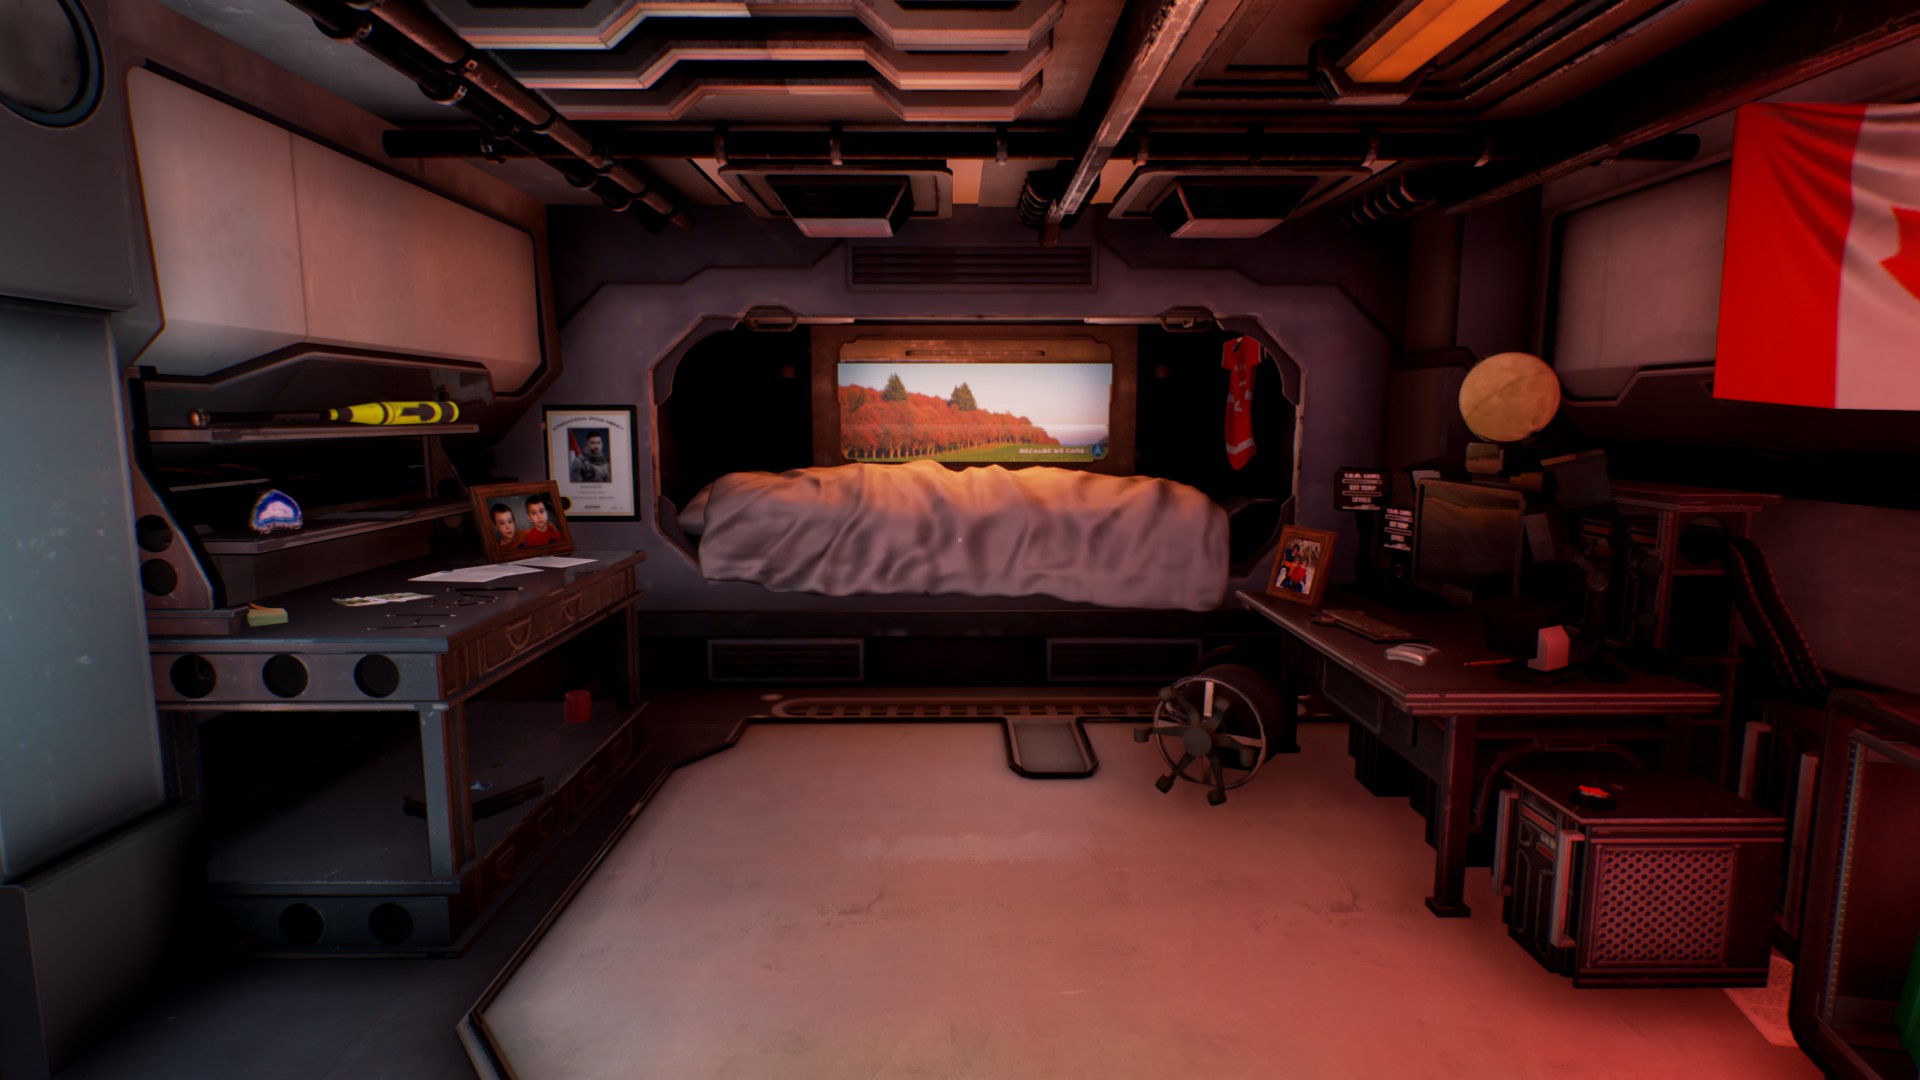 Rec Room on X: New room by Greybeard, ^XWingAdventure. TIE fighters fly  around you, lots of sound effects, moving terrain, and interactive controls  in the cockpit. You can search for rooms and